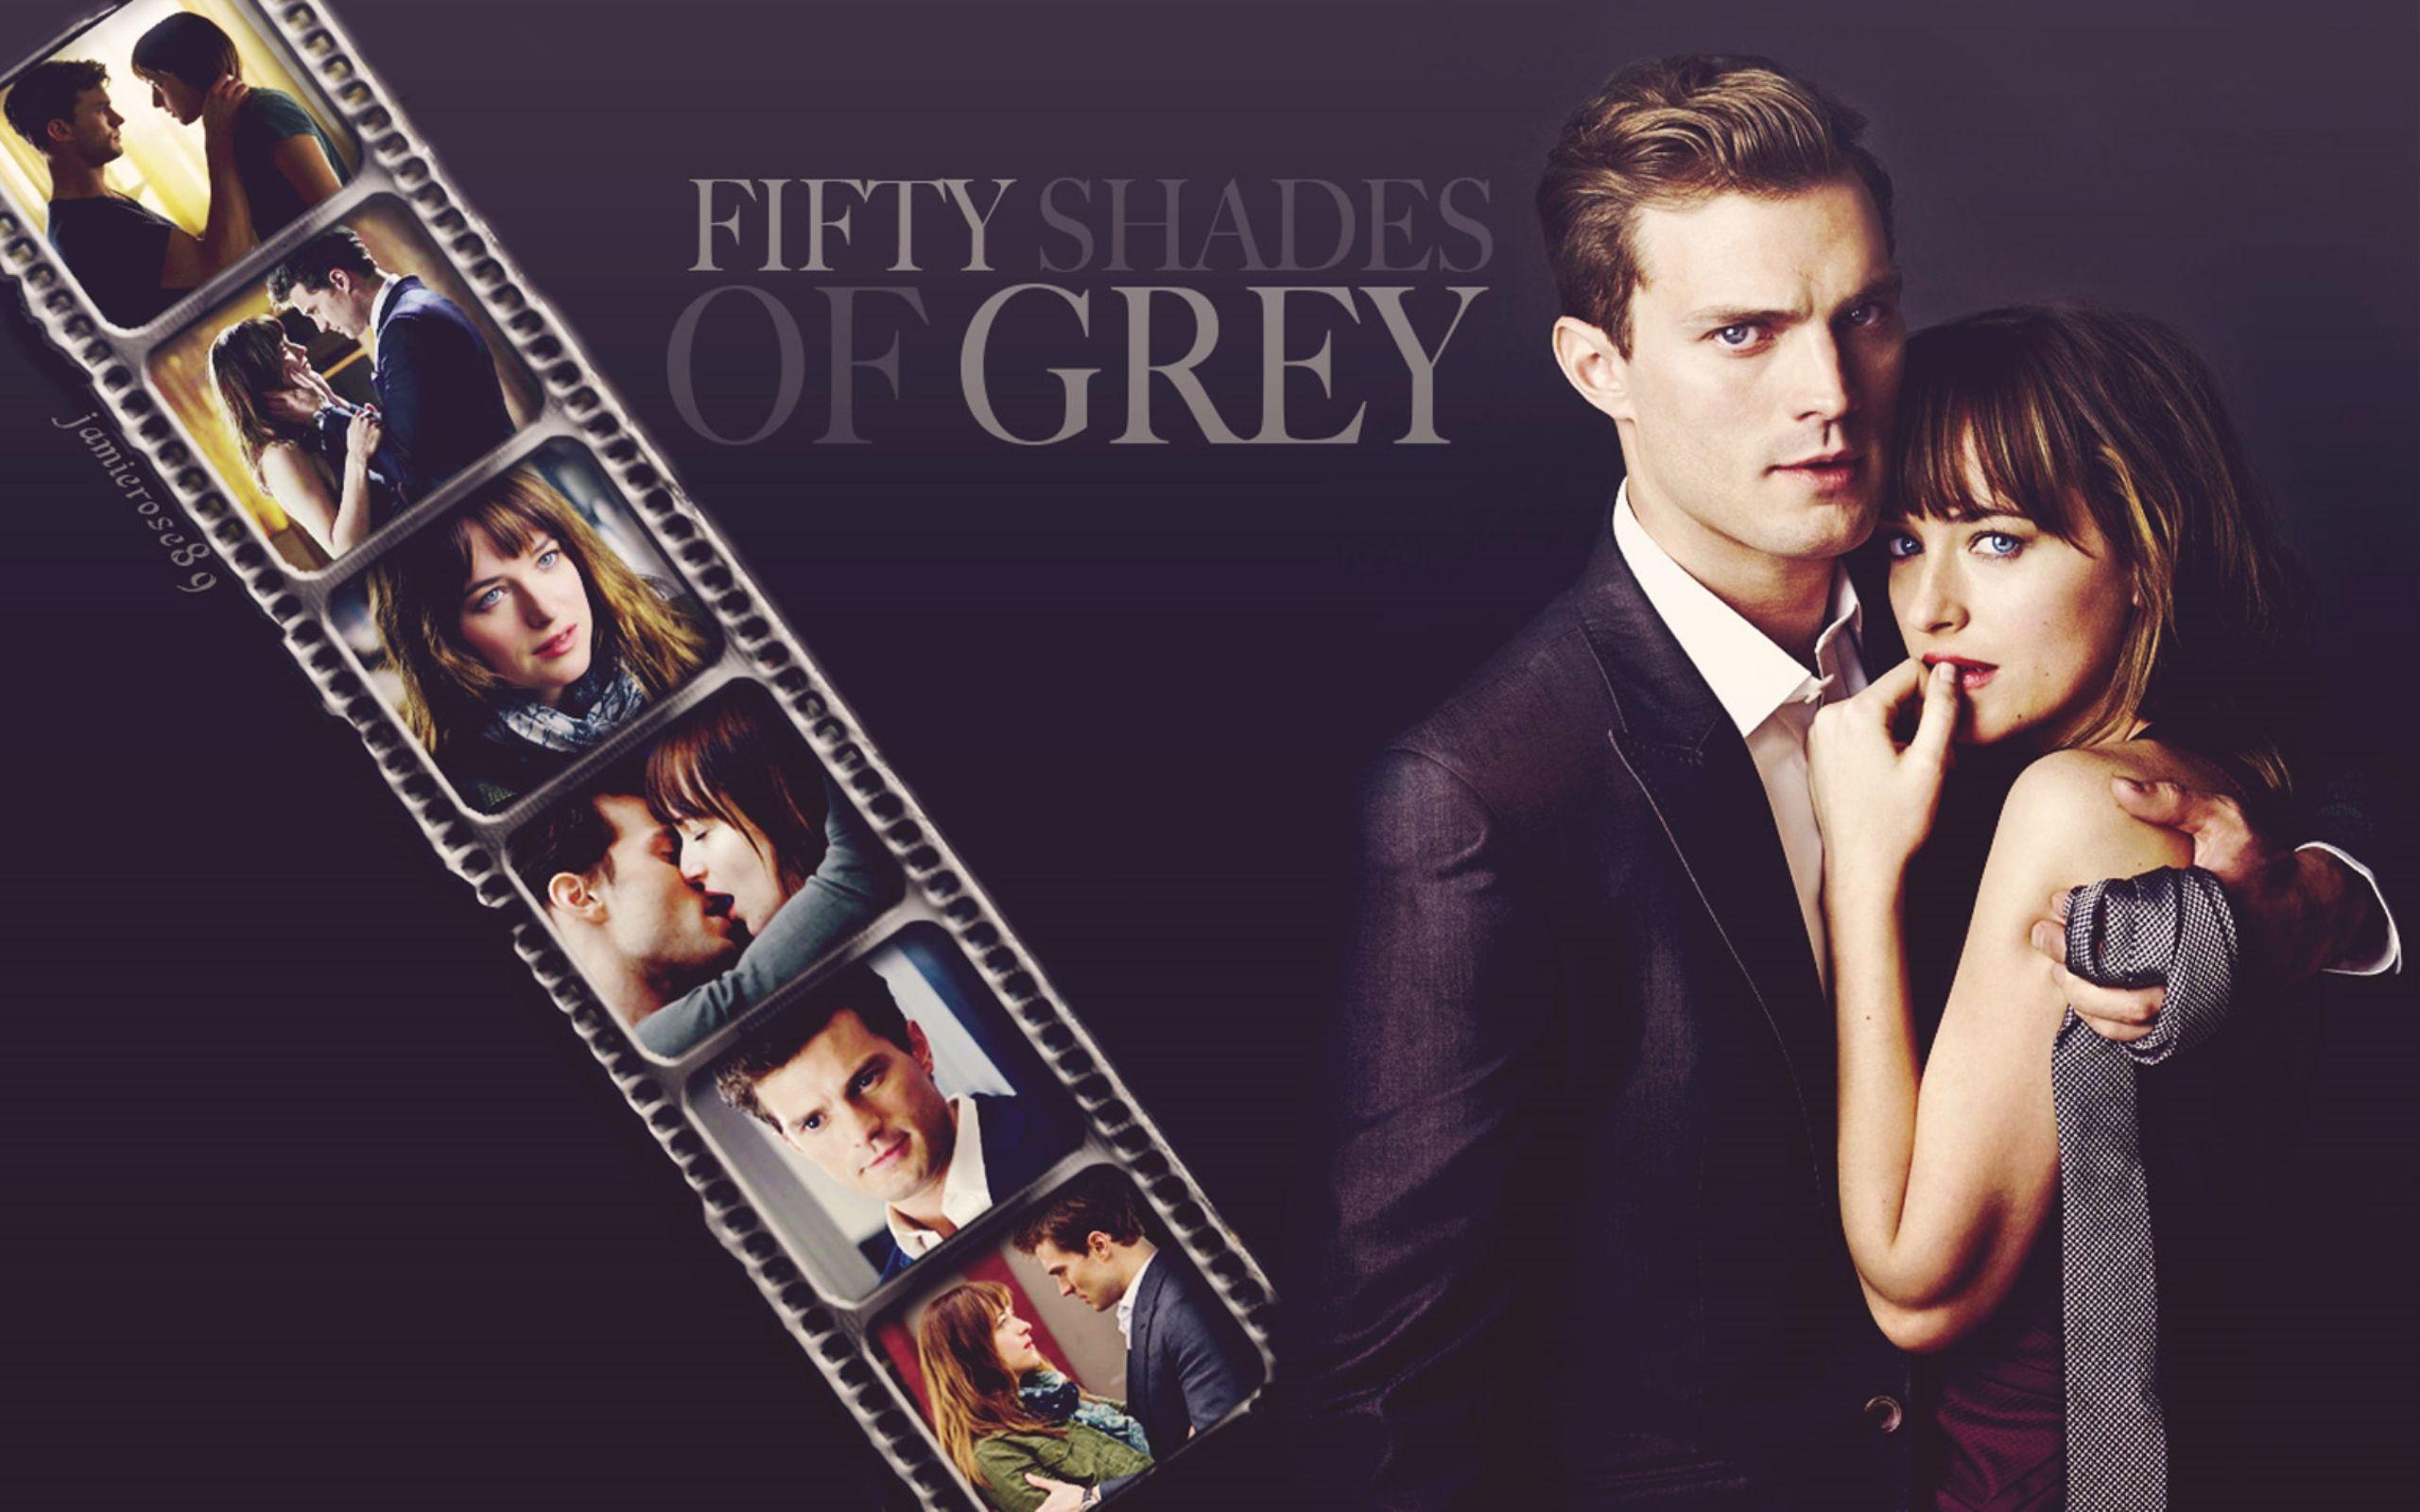 Fifty Shades of Grey Movie 2015 wallpaper